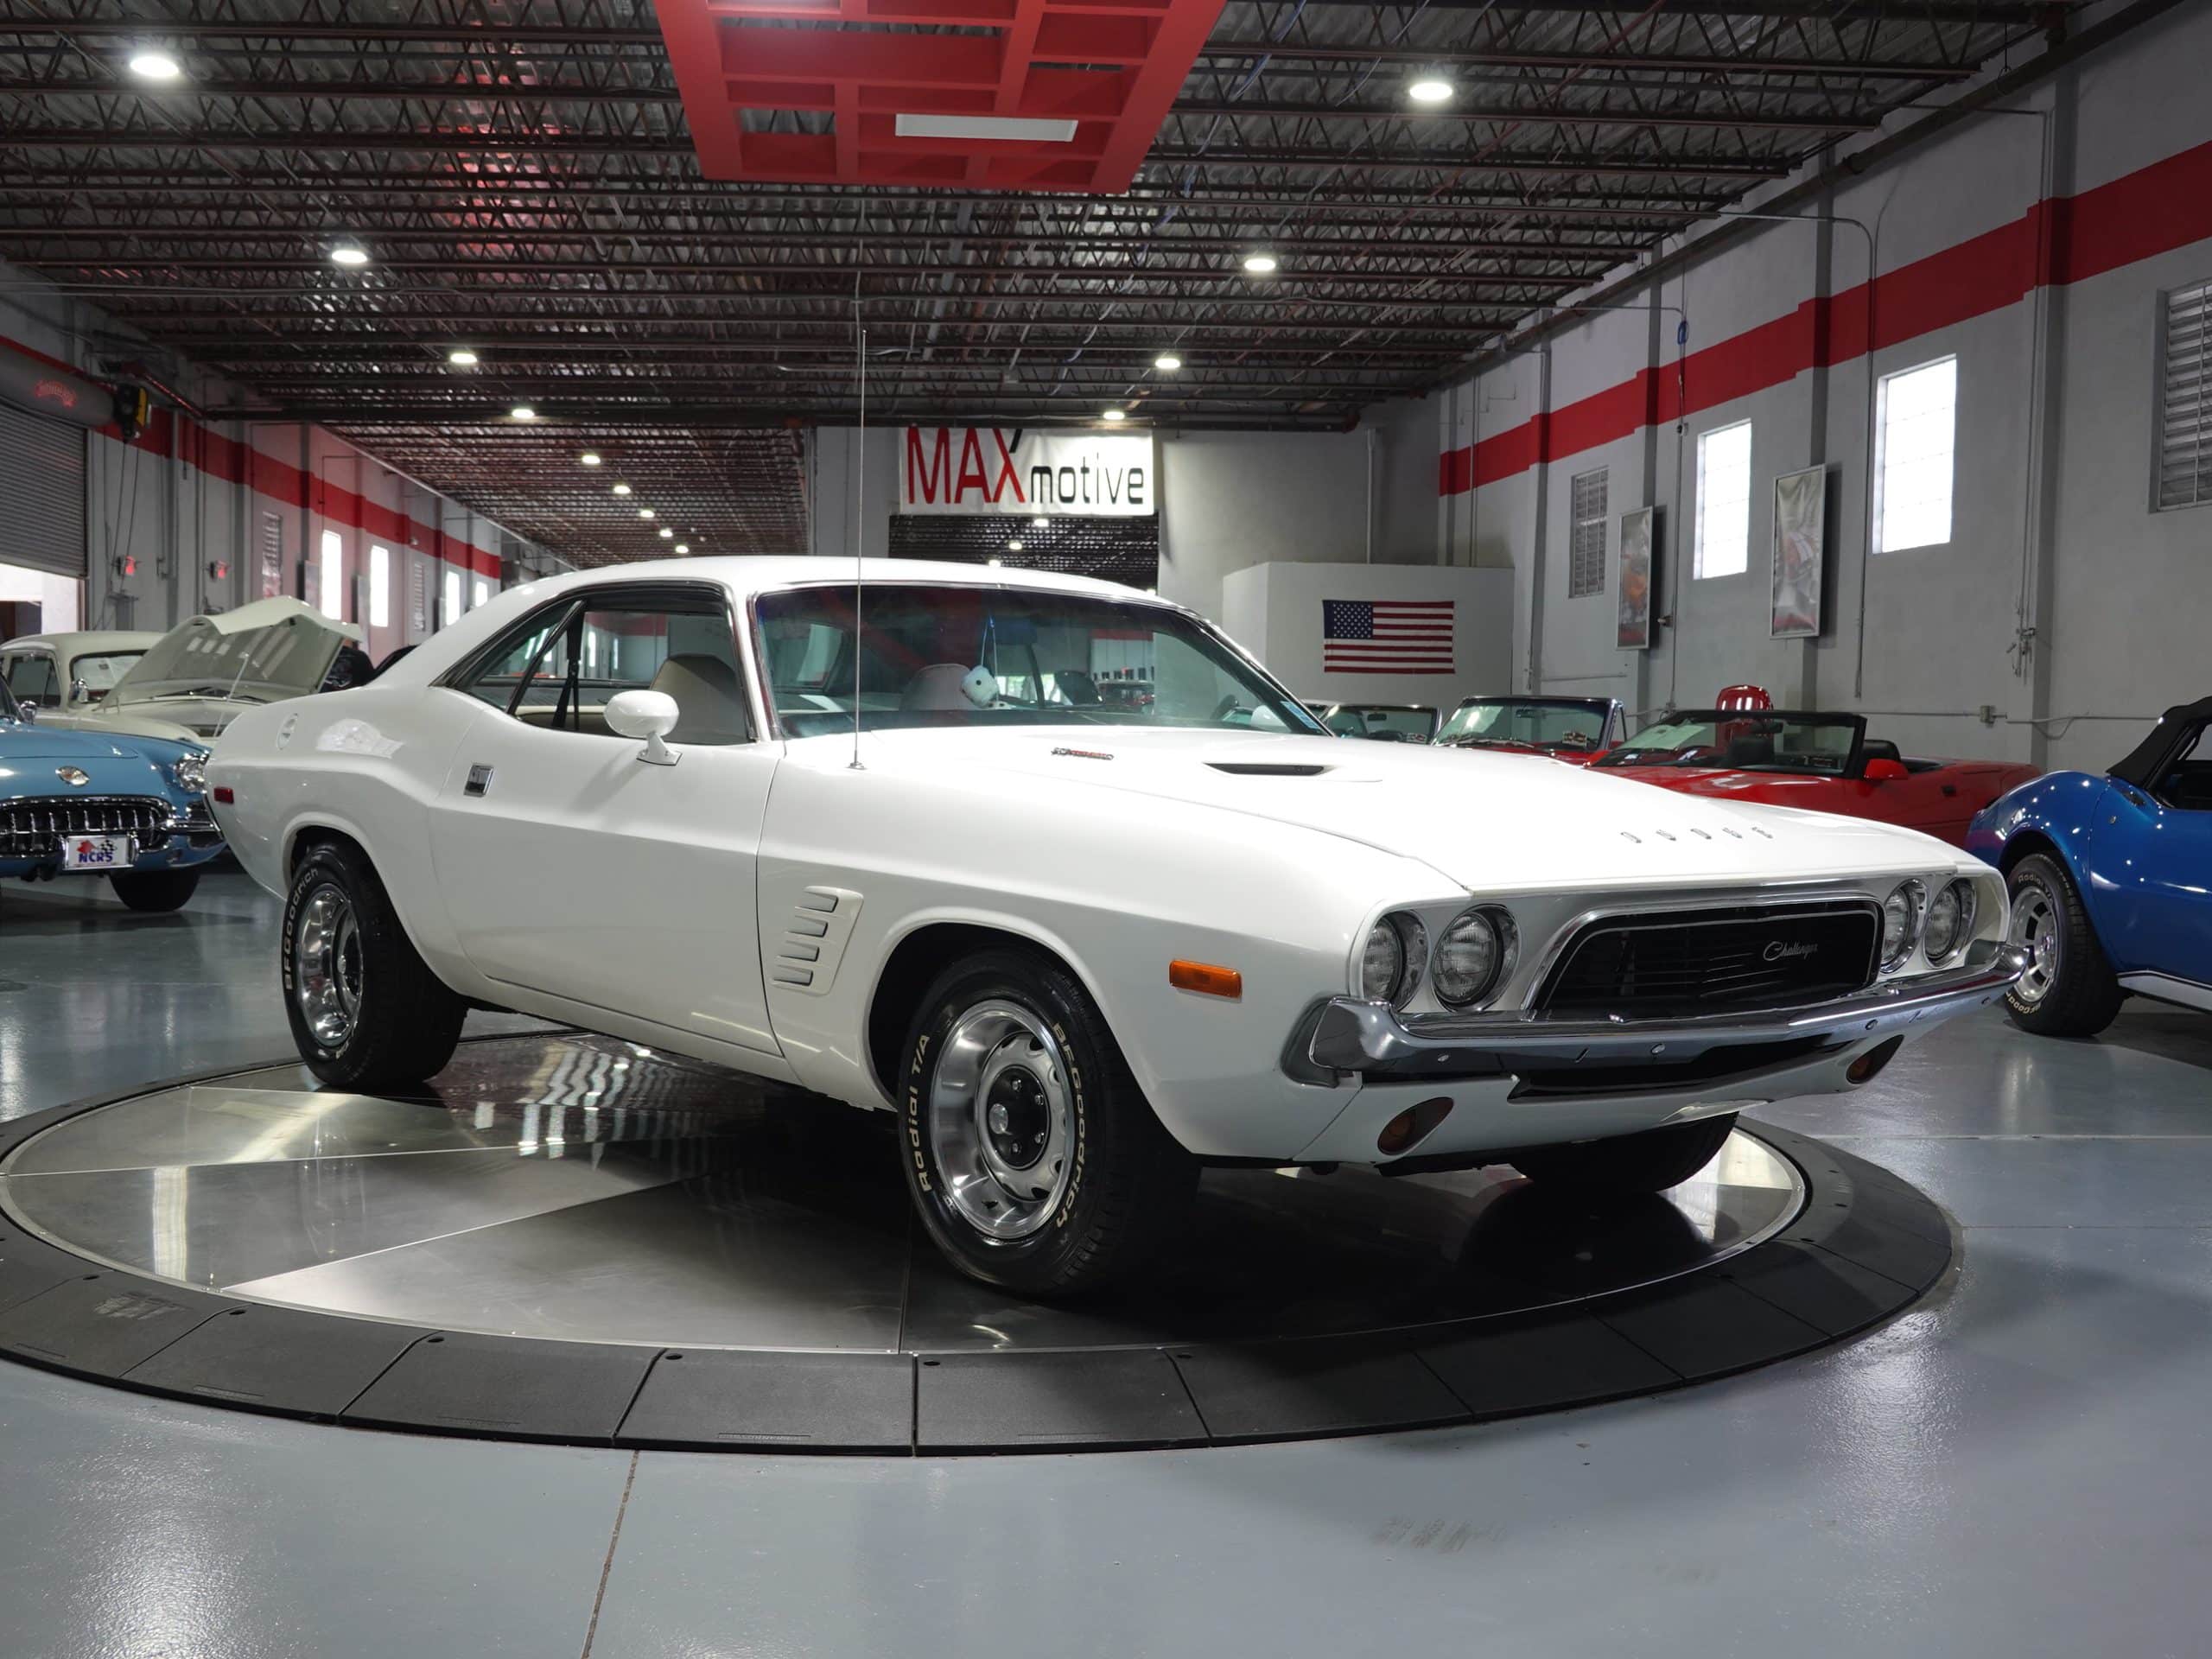 1972 Dodge Challenger Coupe